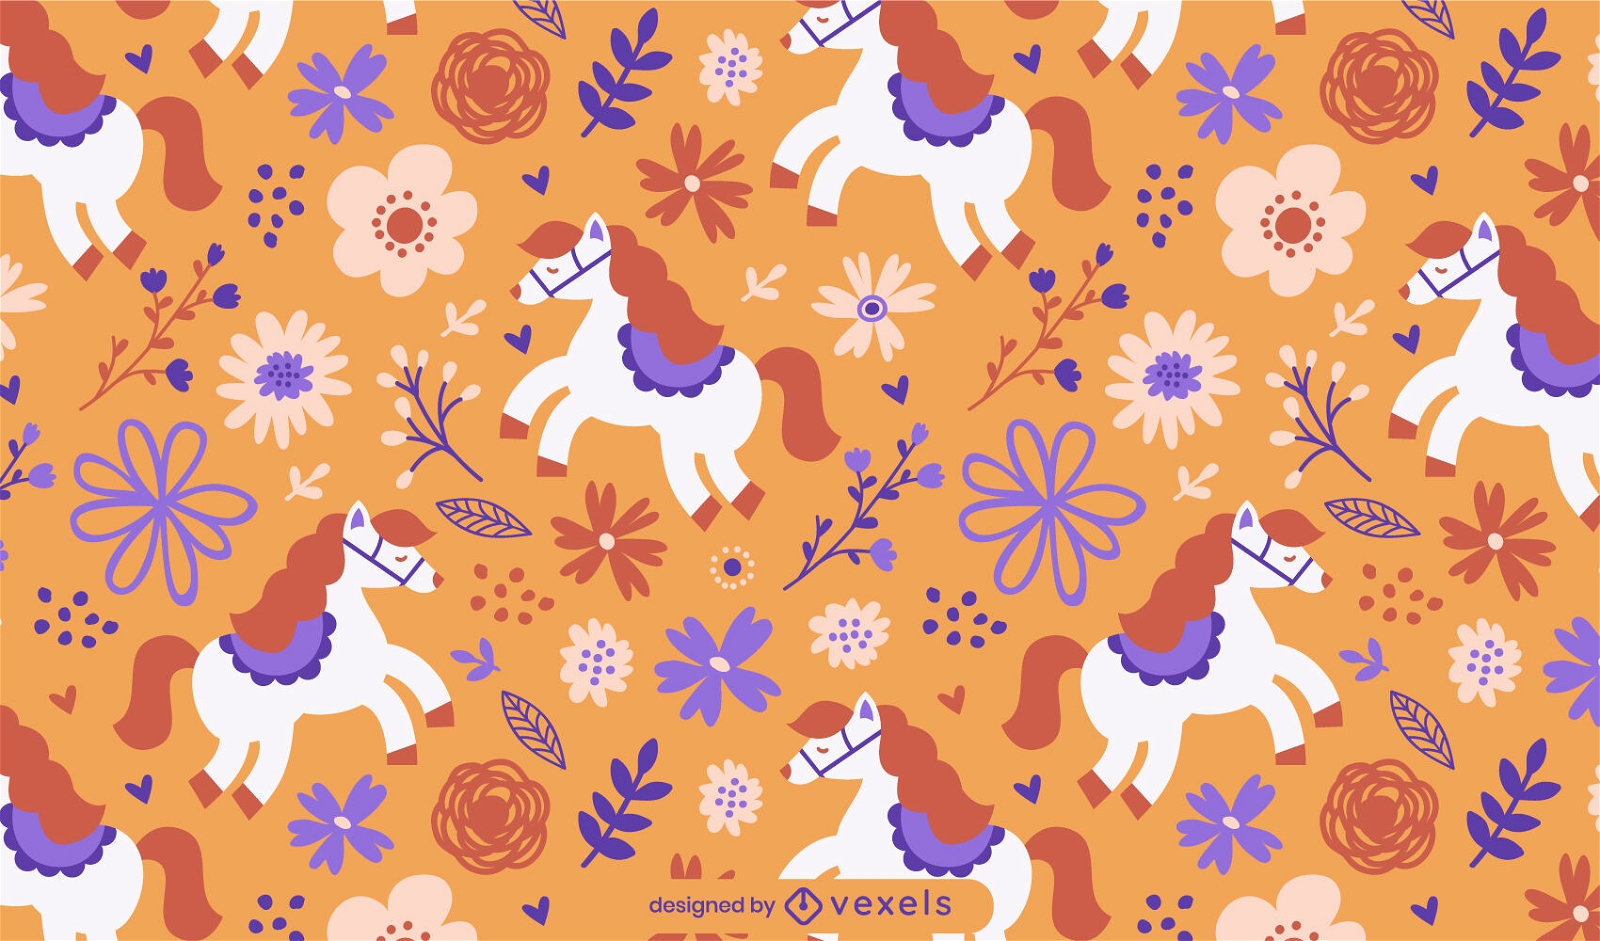 Horses and flowers seeamless pattern design